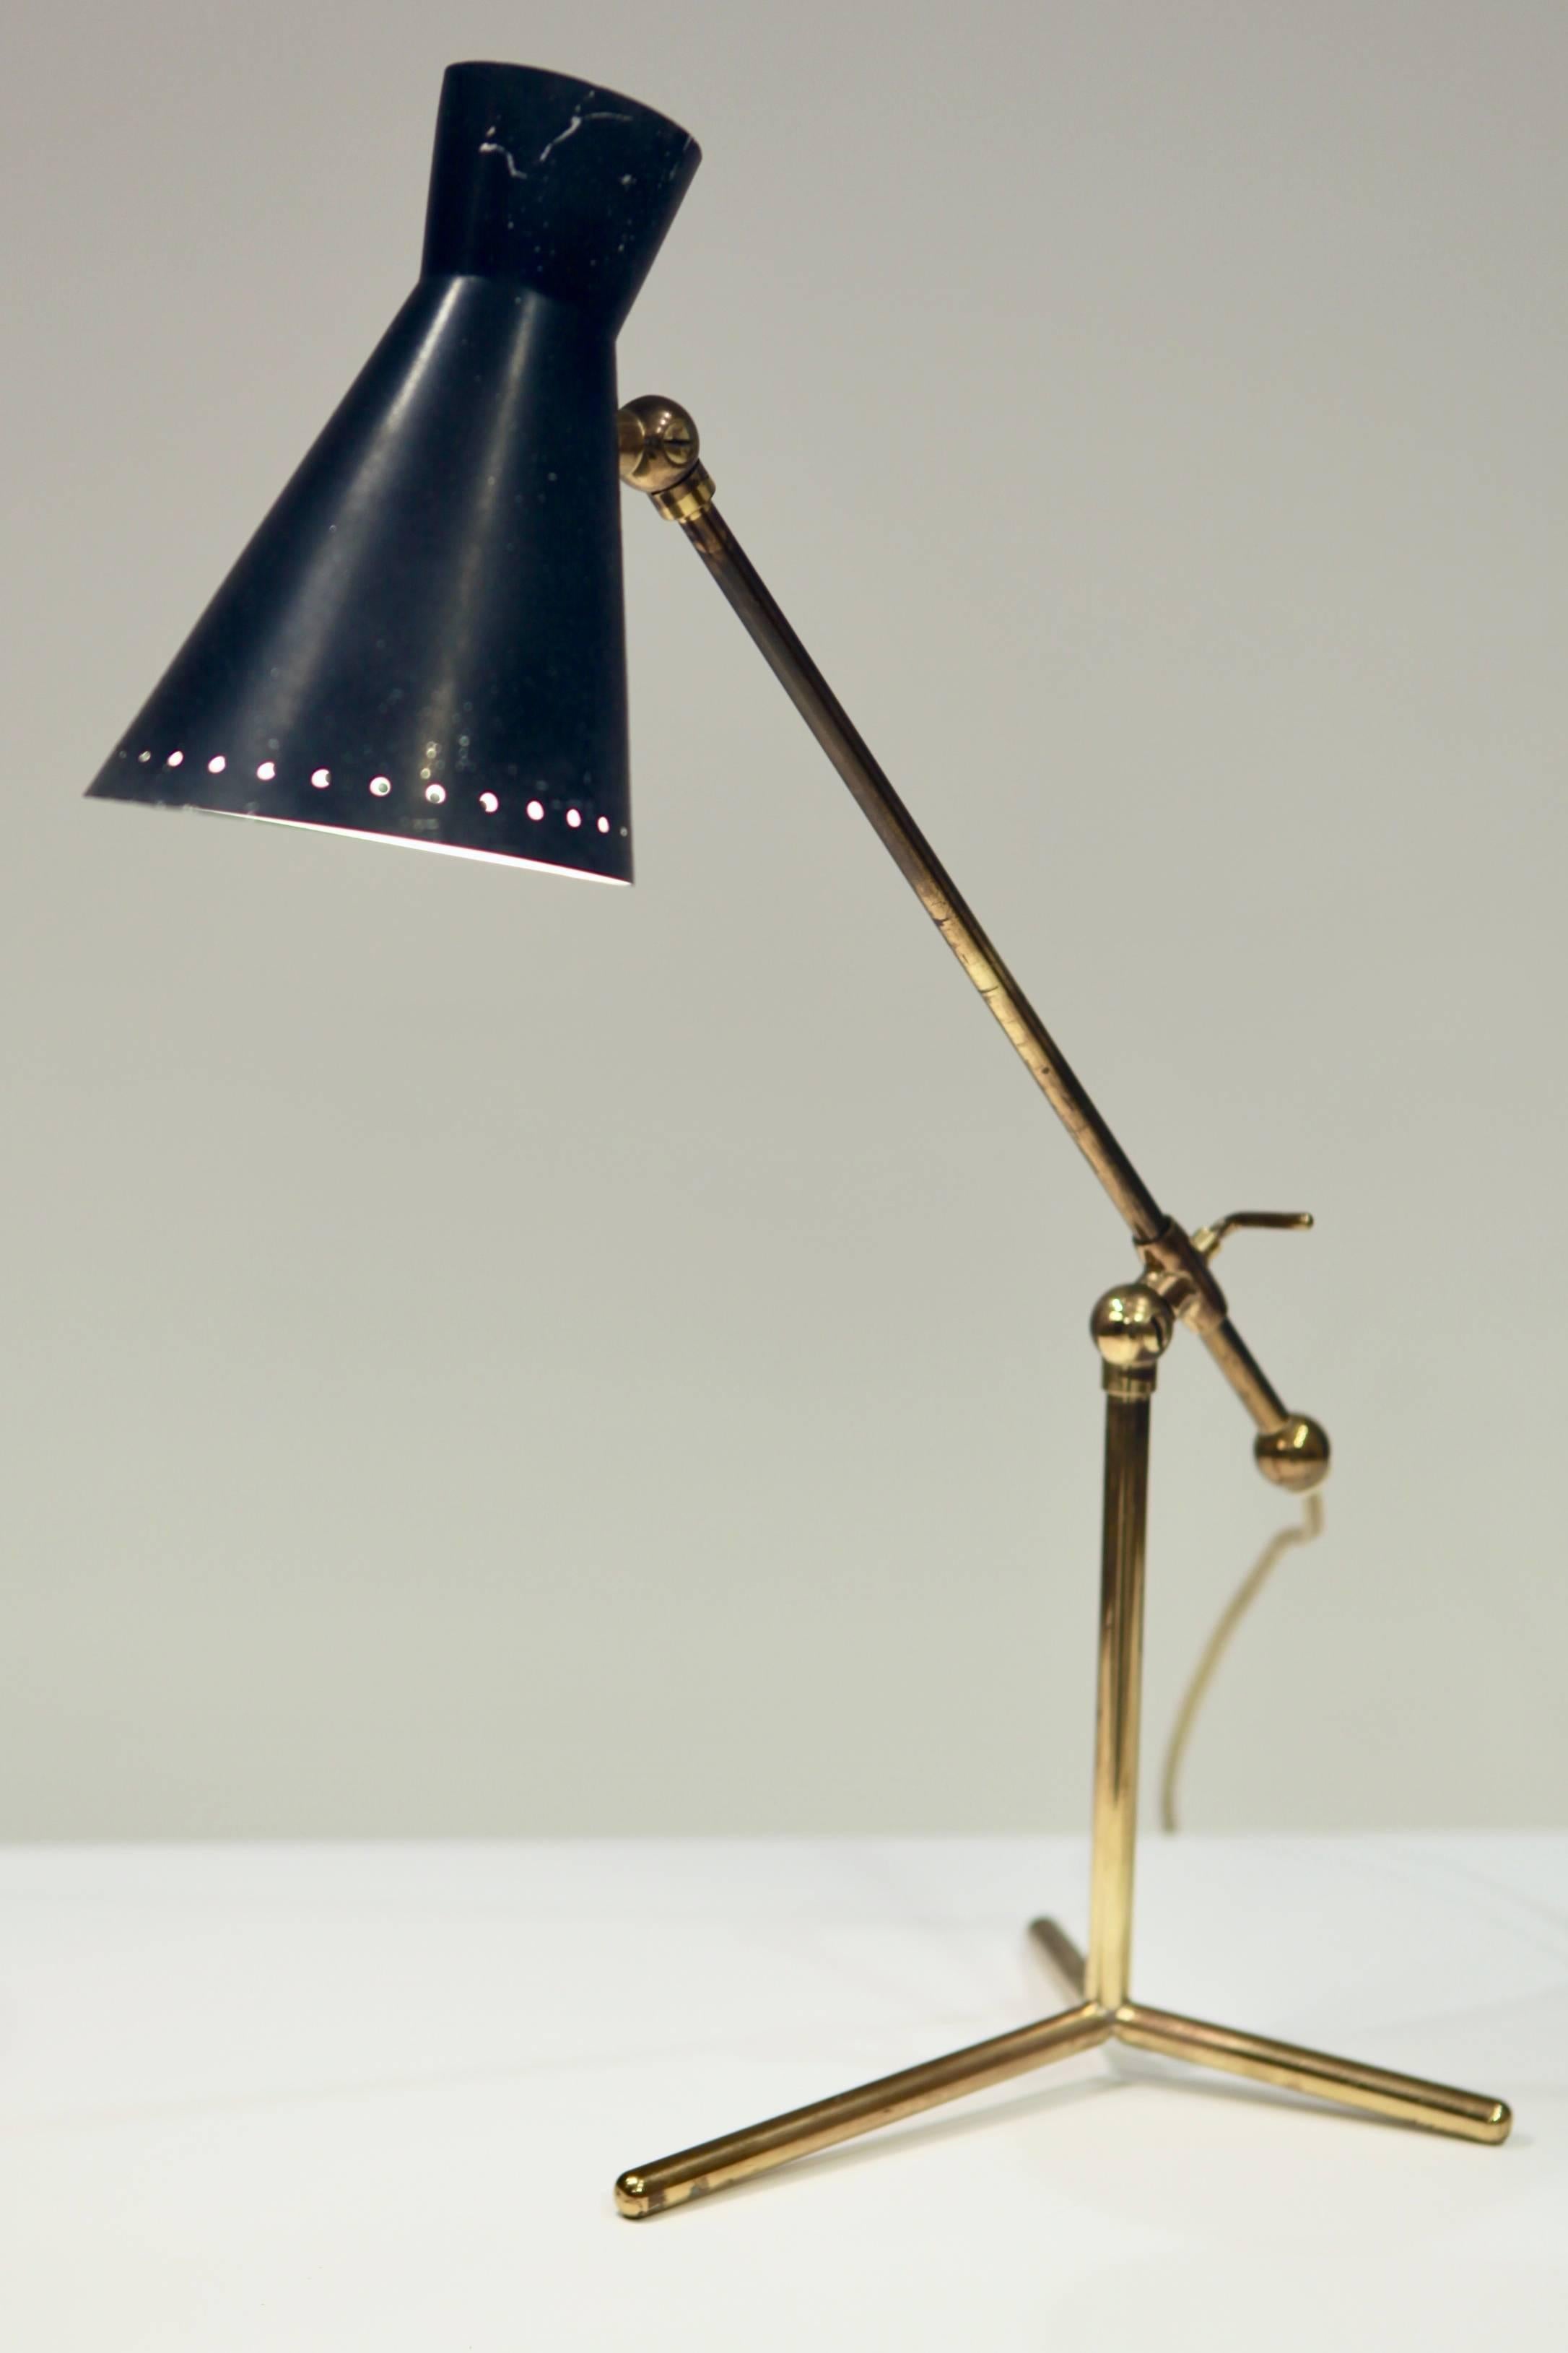 Desk or table lamp by Stilnovo, Italy 1950s
Brass and black lacquered metal, adjustable height, 
rewired